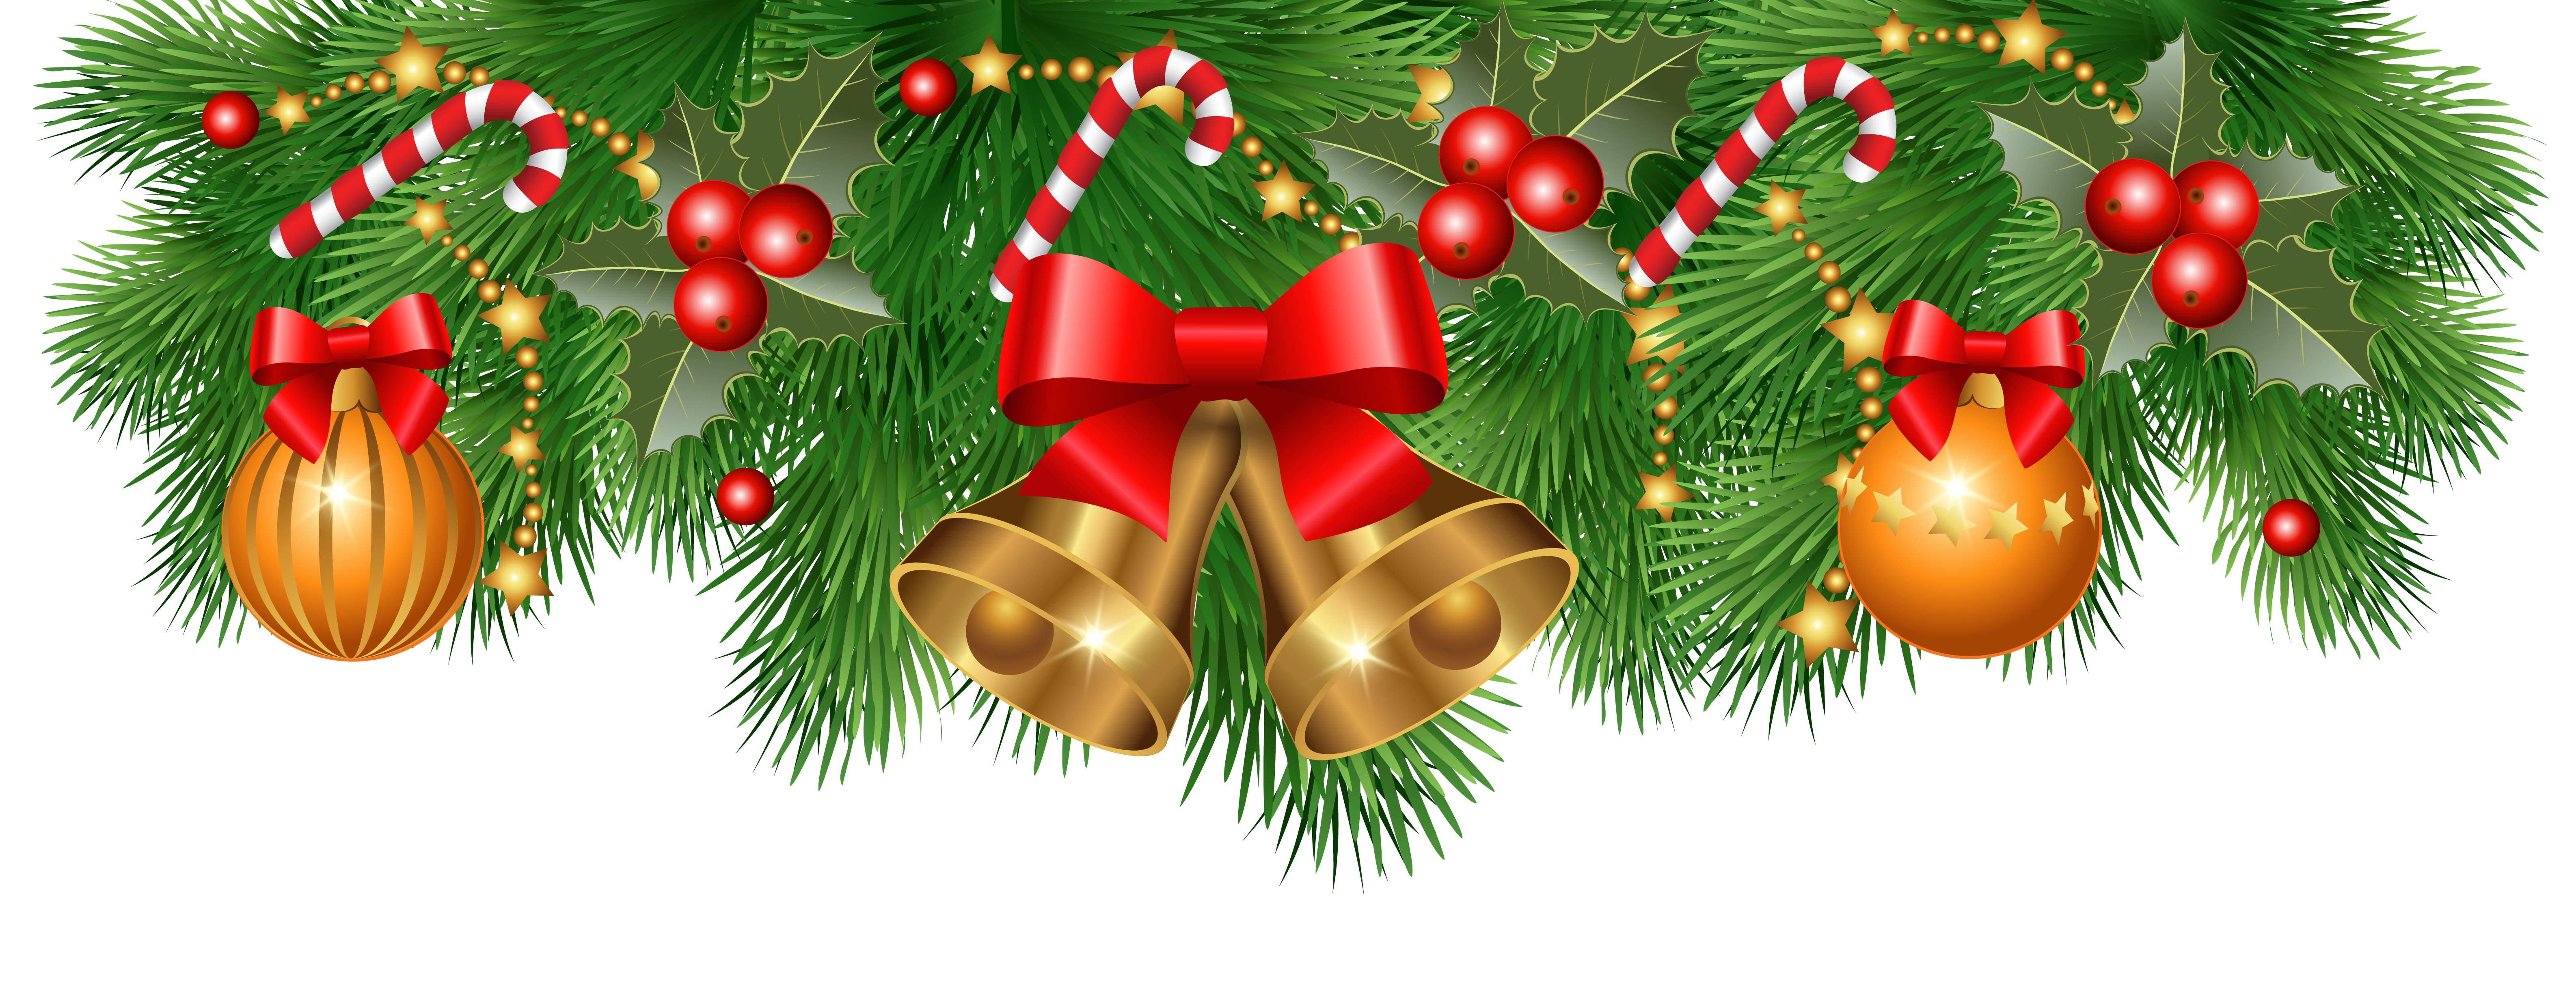 Christmas Border Decoration PNG Clipart Image